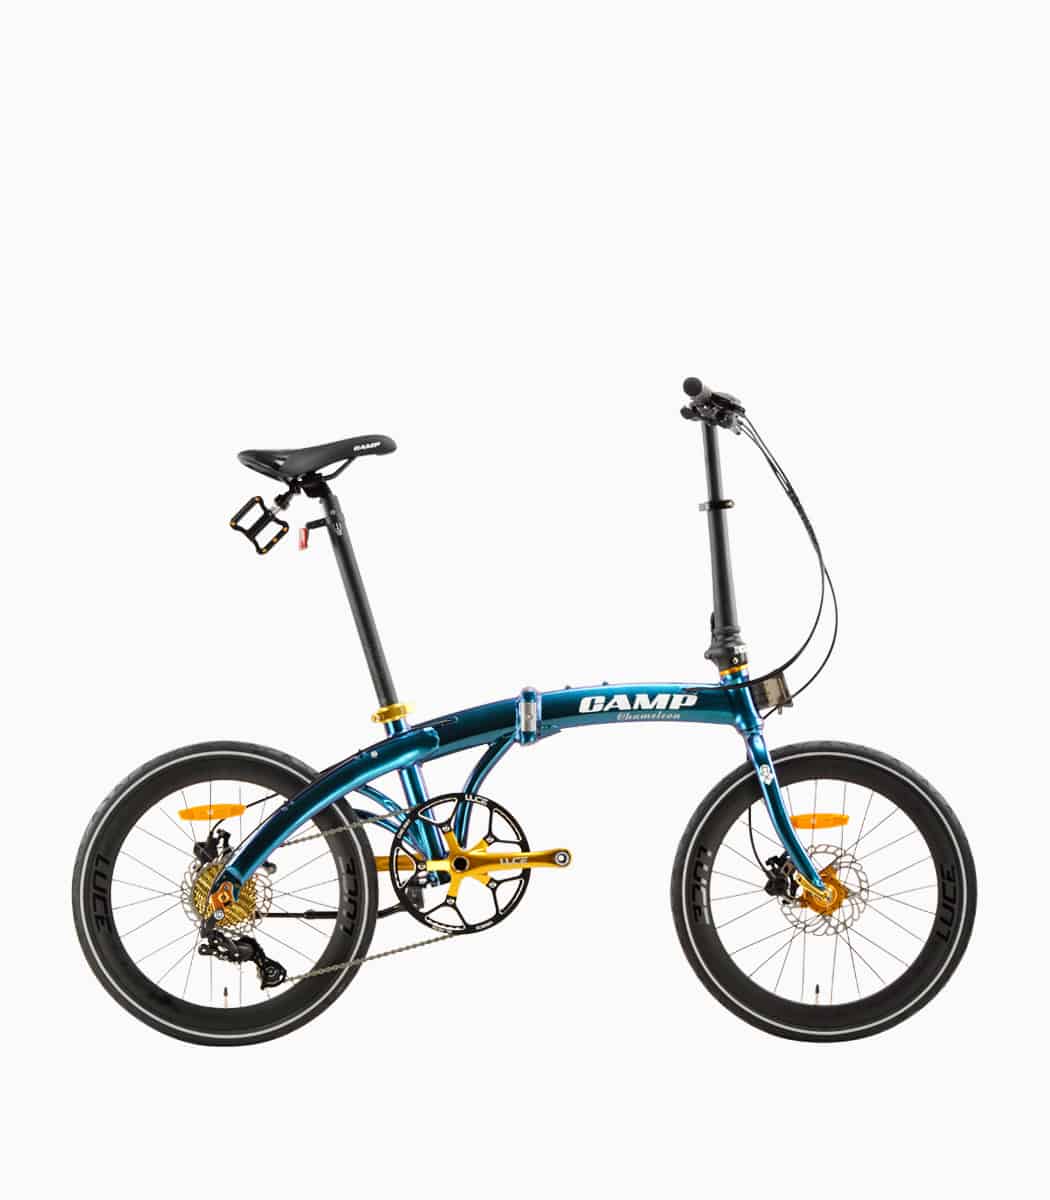 CAMP Chameleon (DIAMOND) foldable bicycle with reflective tyres right